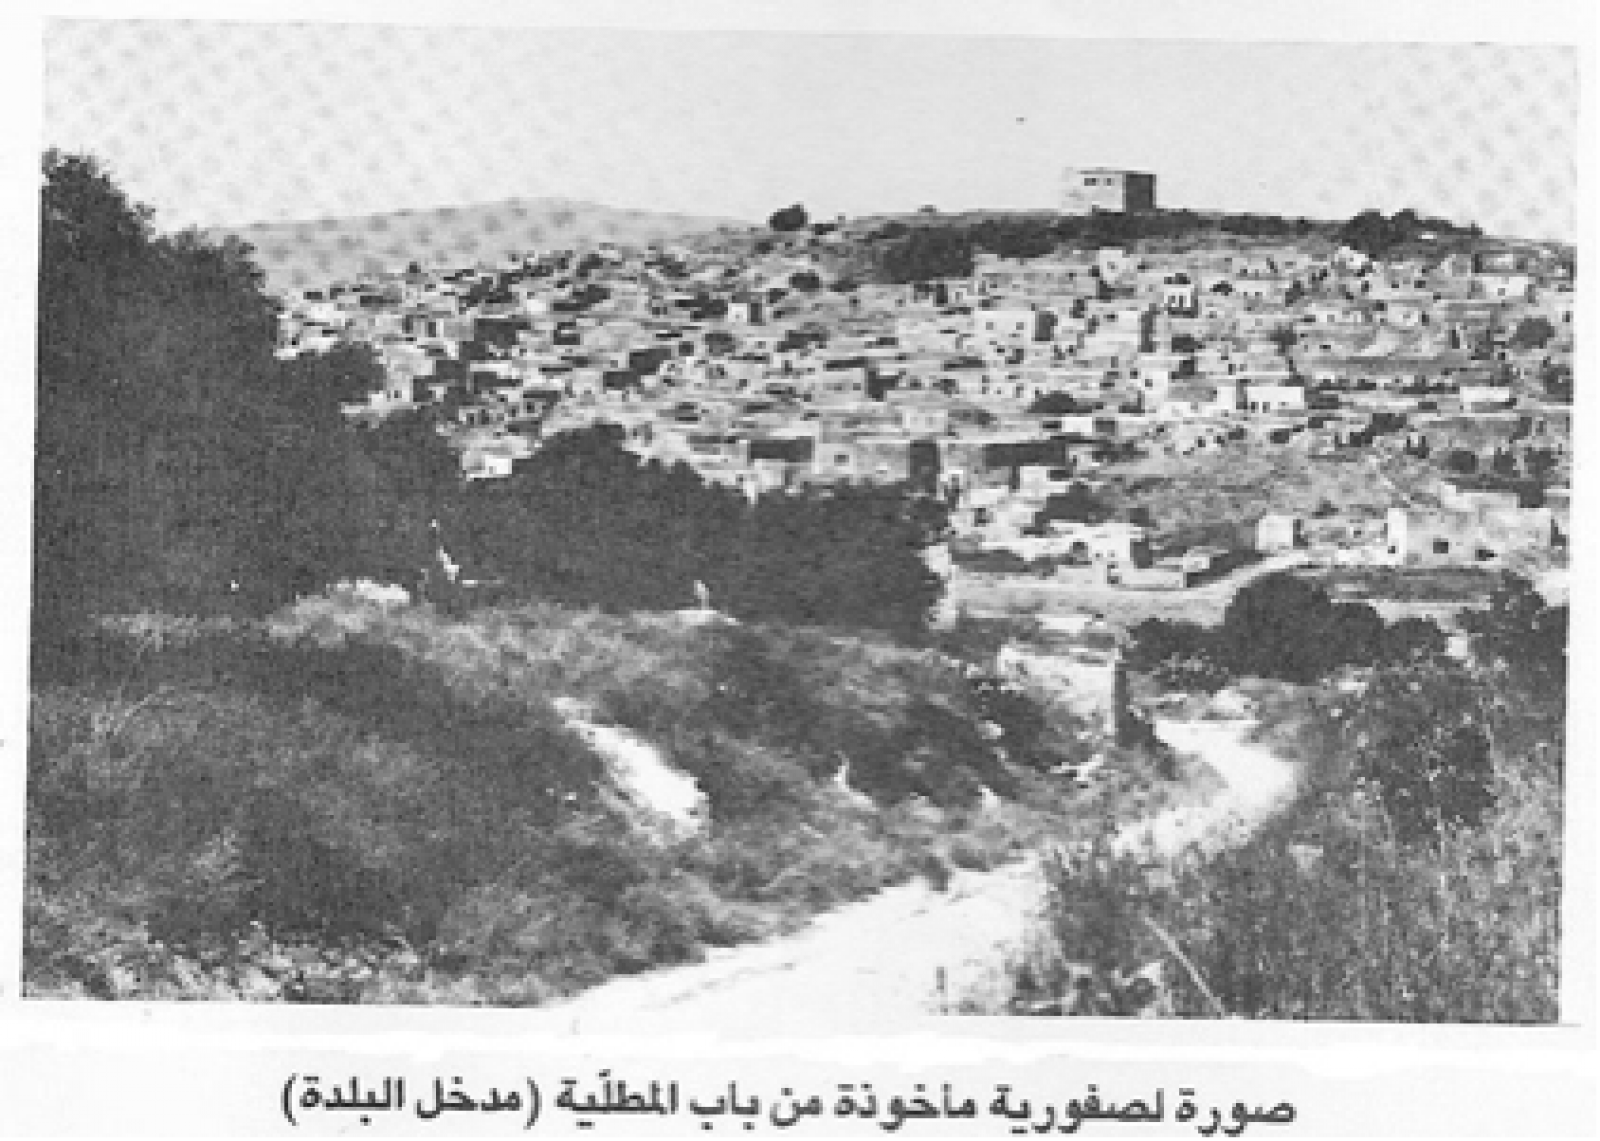 An old photo of Saffuriyya/ The entrance to the town, Zochrot website